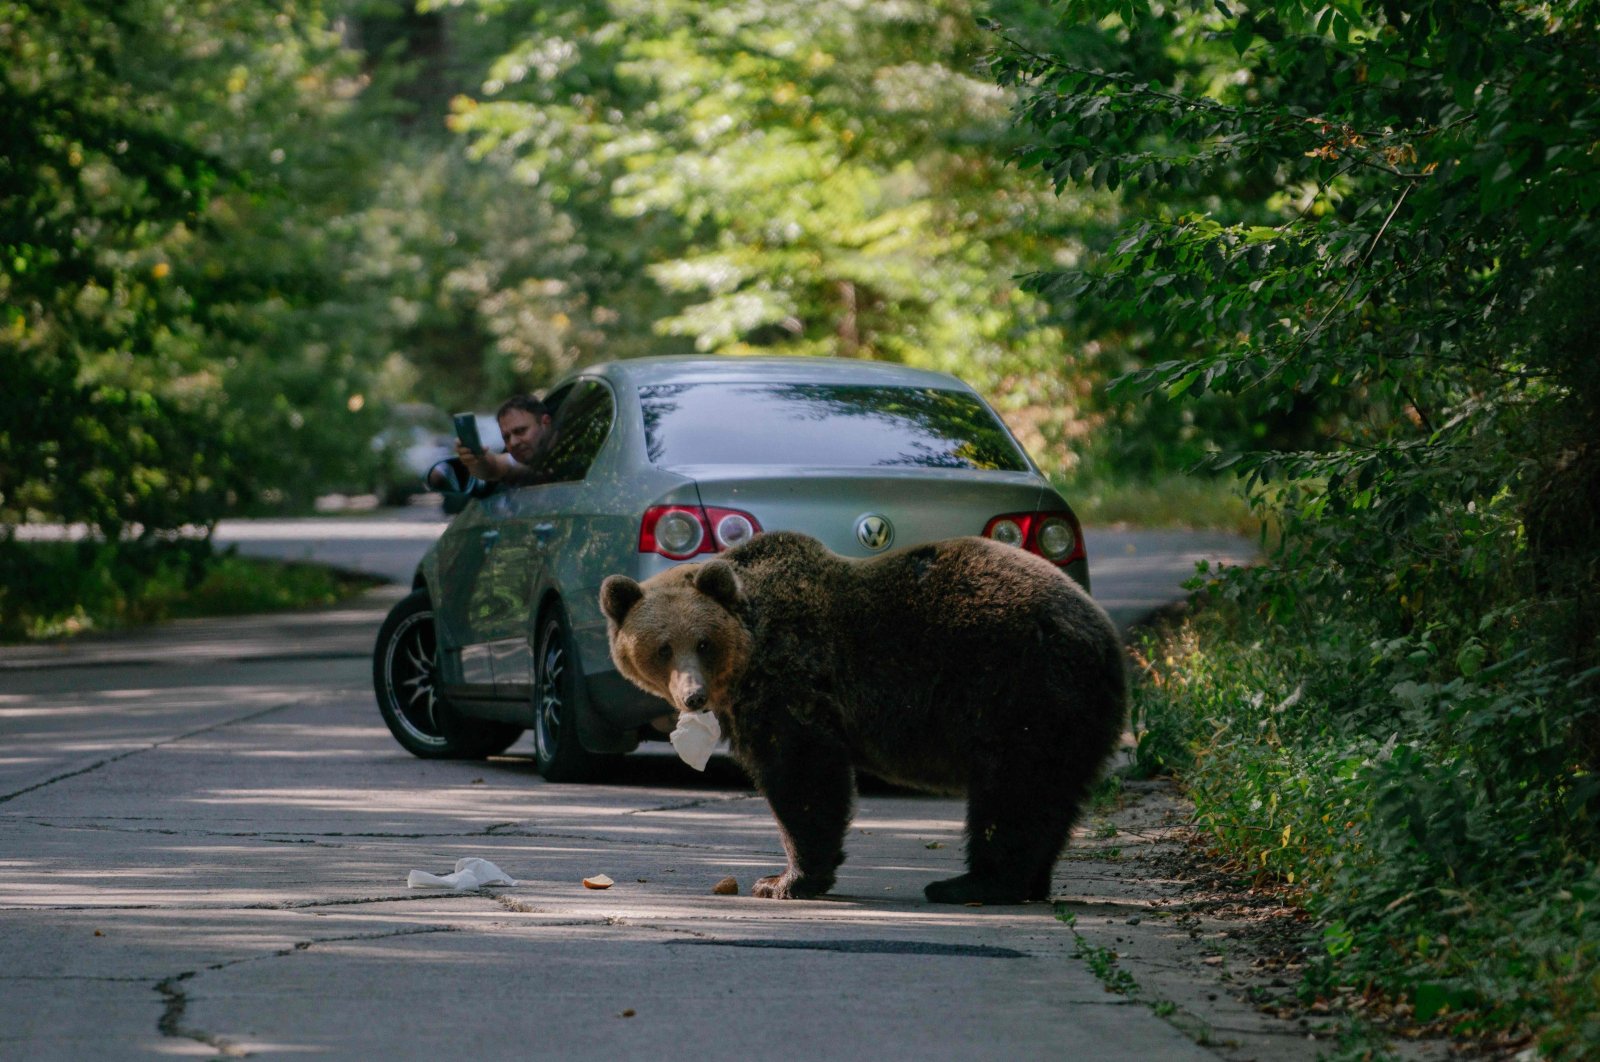 A bear eats a sandwich thrown by a passing driver, while another driver films with his mobile phone, Covasna, Romania, Sept. 29, 2023. (AFP Photo)